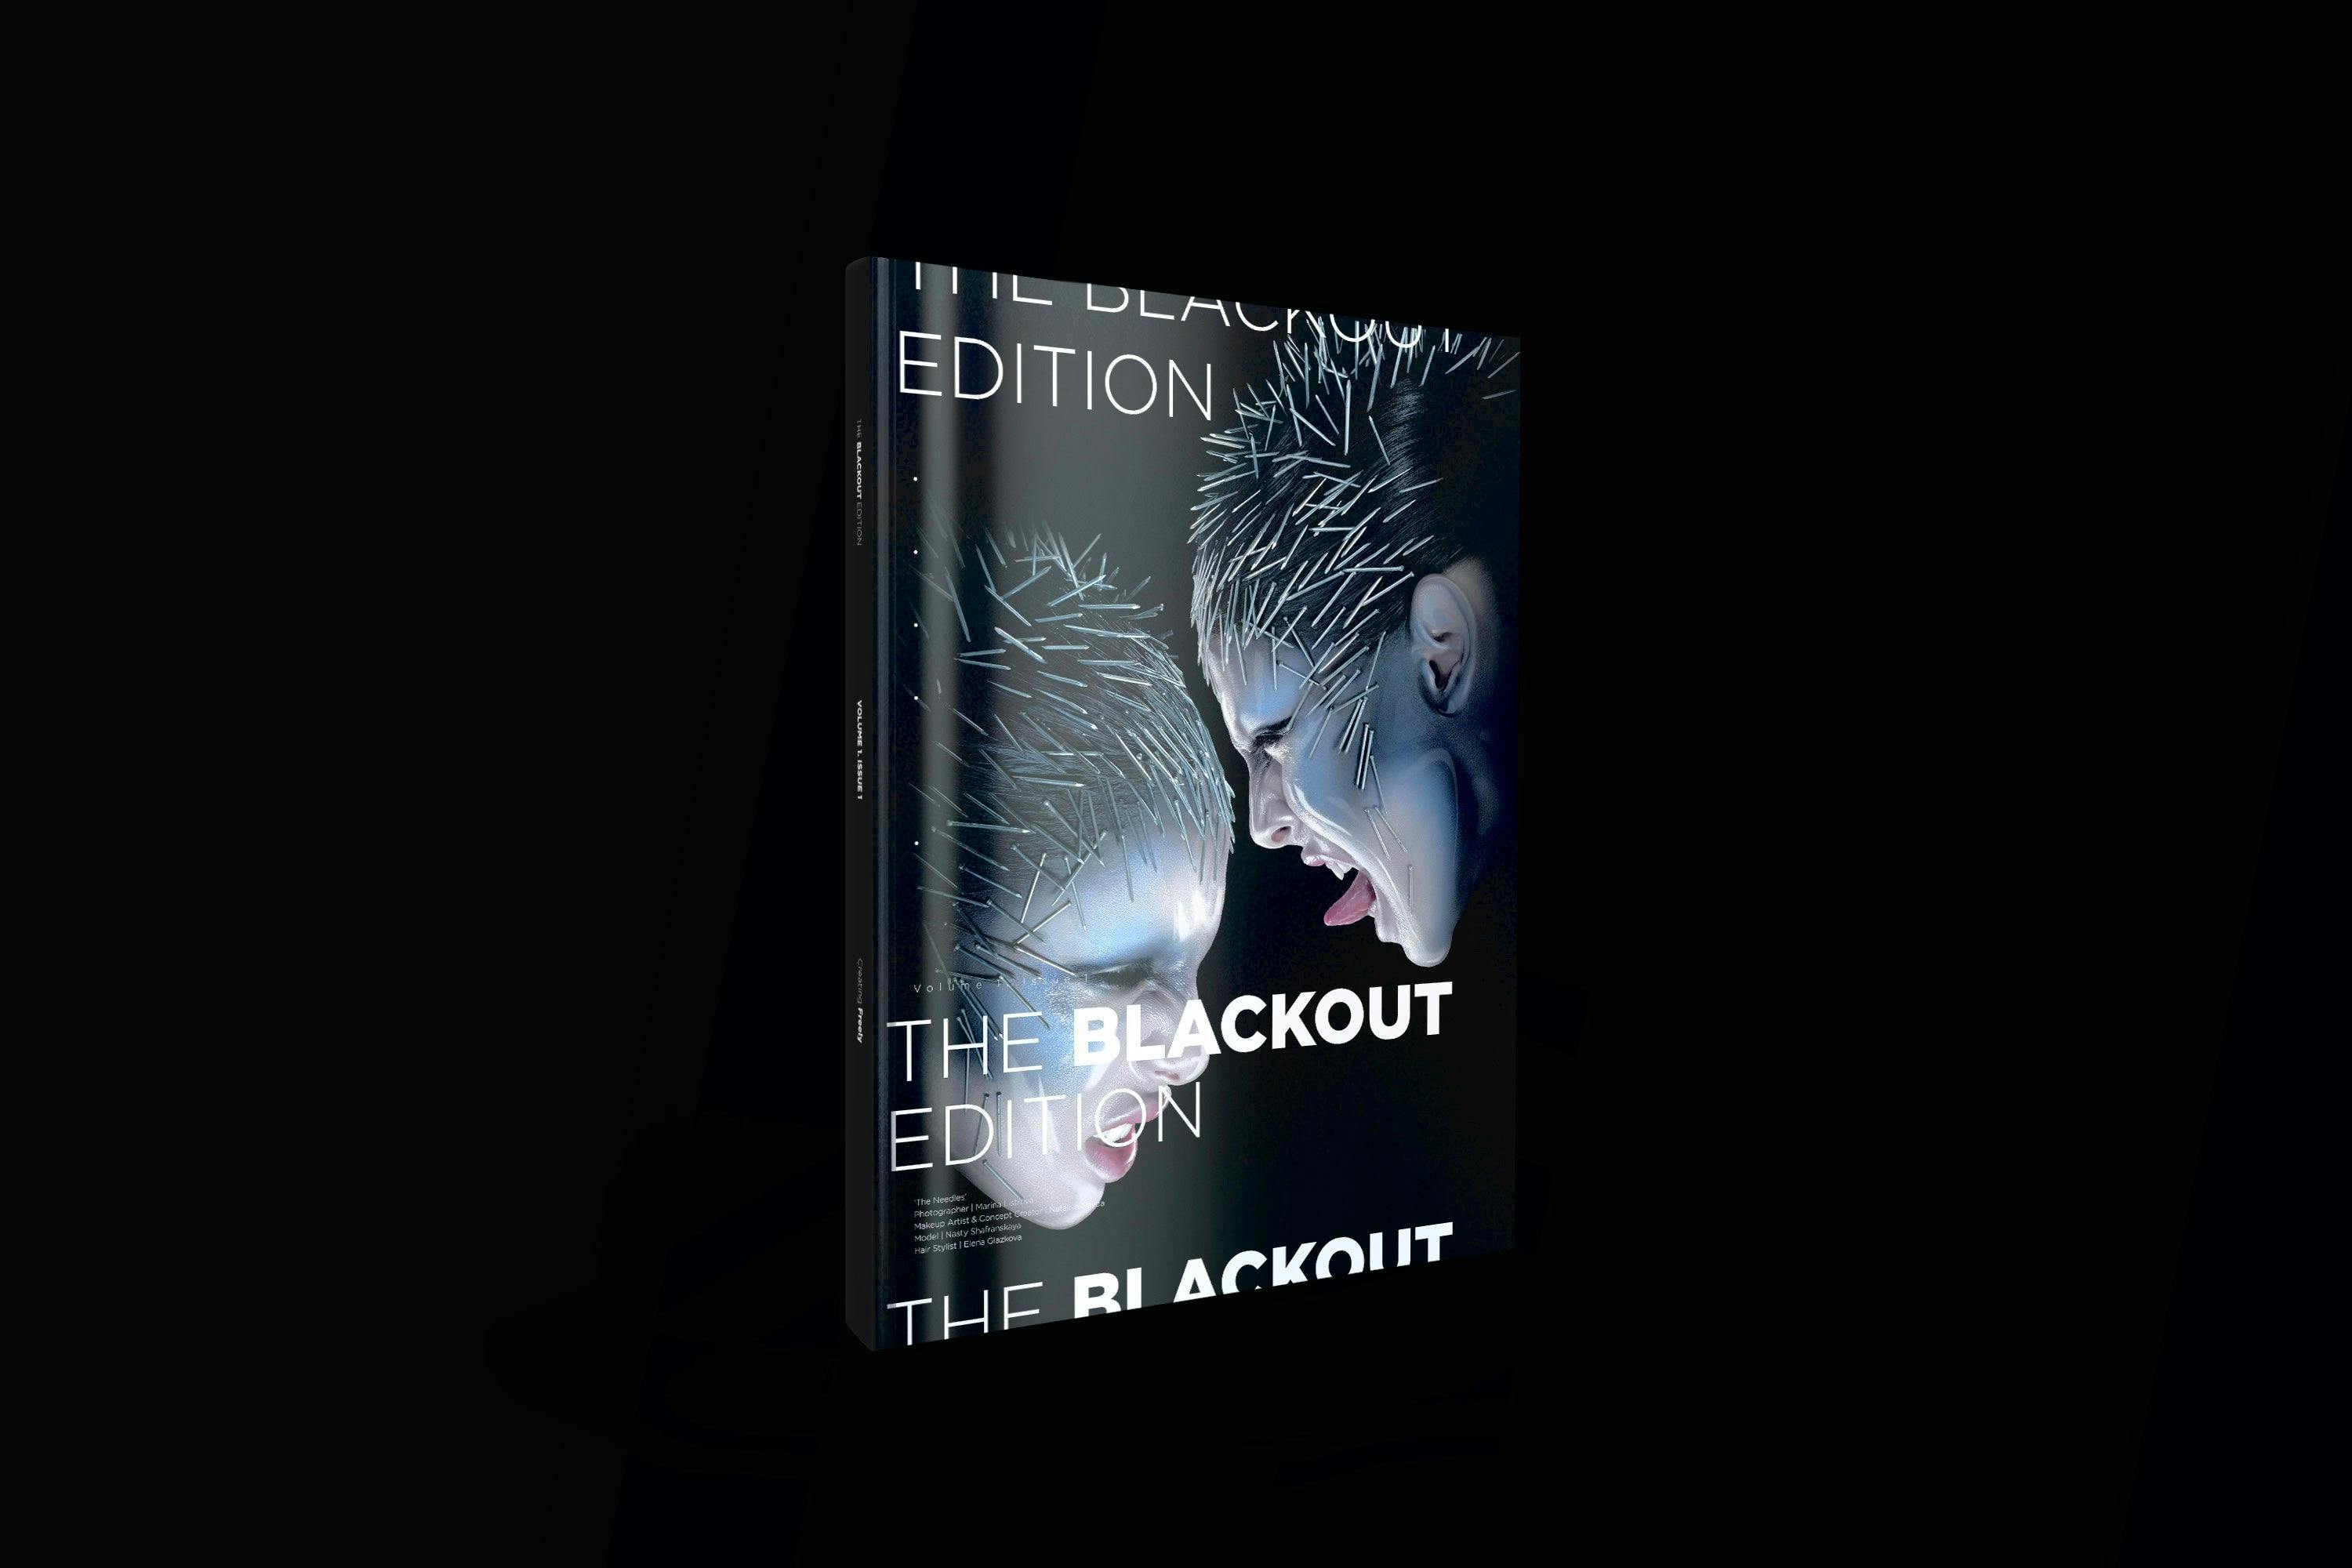 The Blackout Edition Photo Book